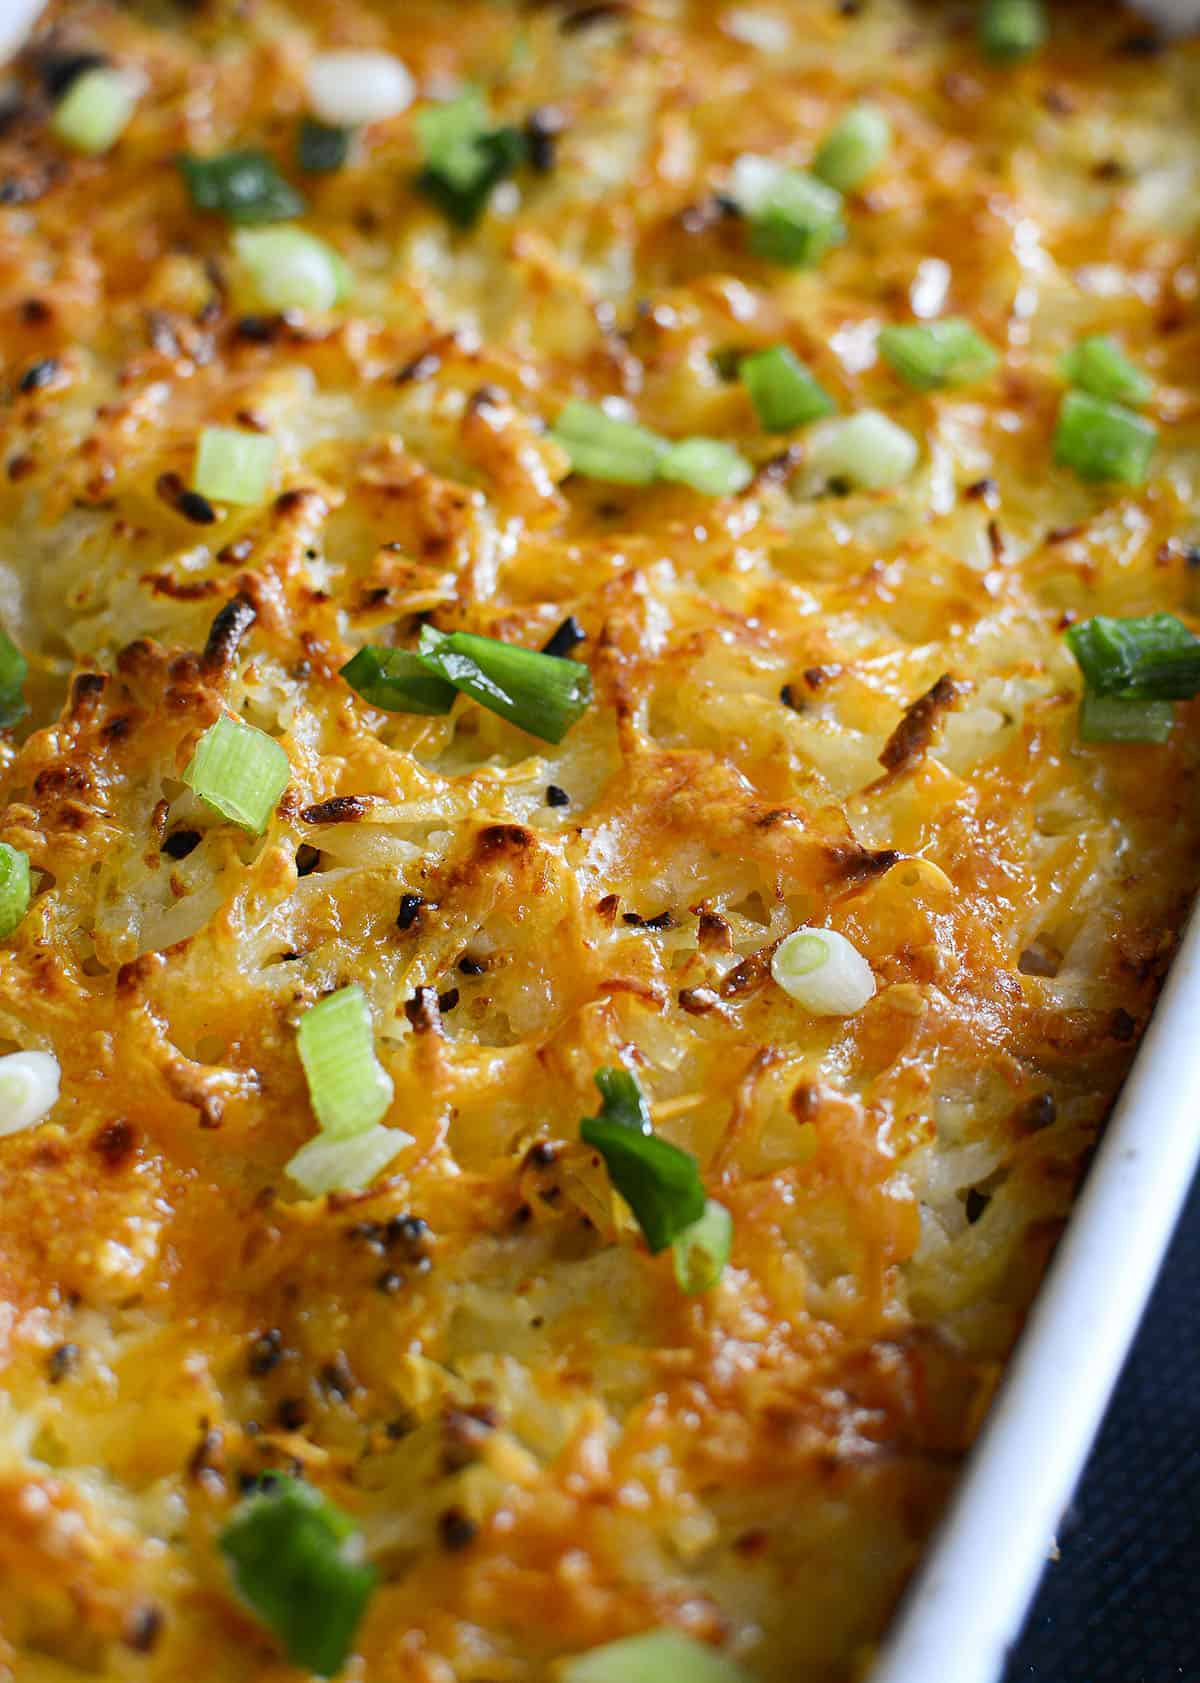 The hashbrown bake just out of the oven with green onions sprinkled over top.